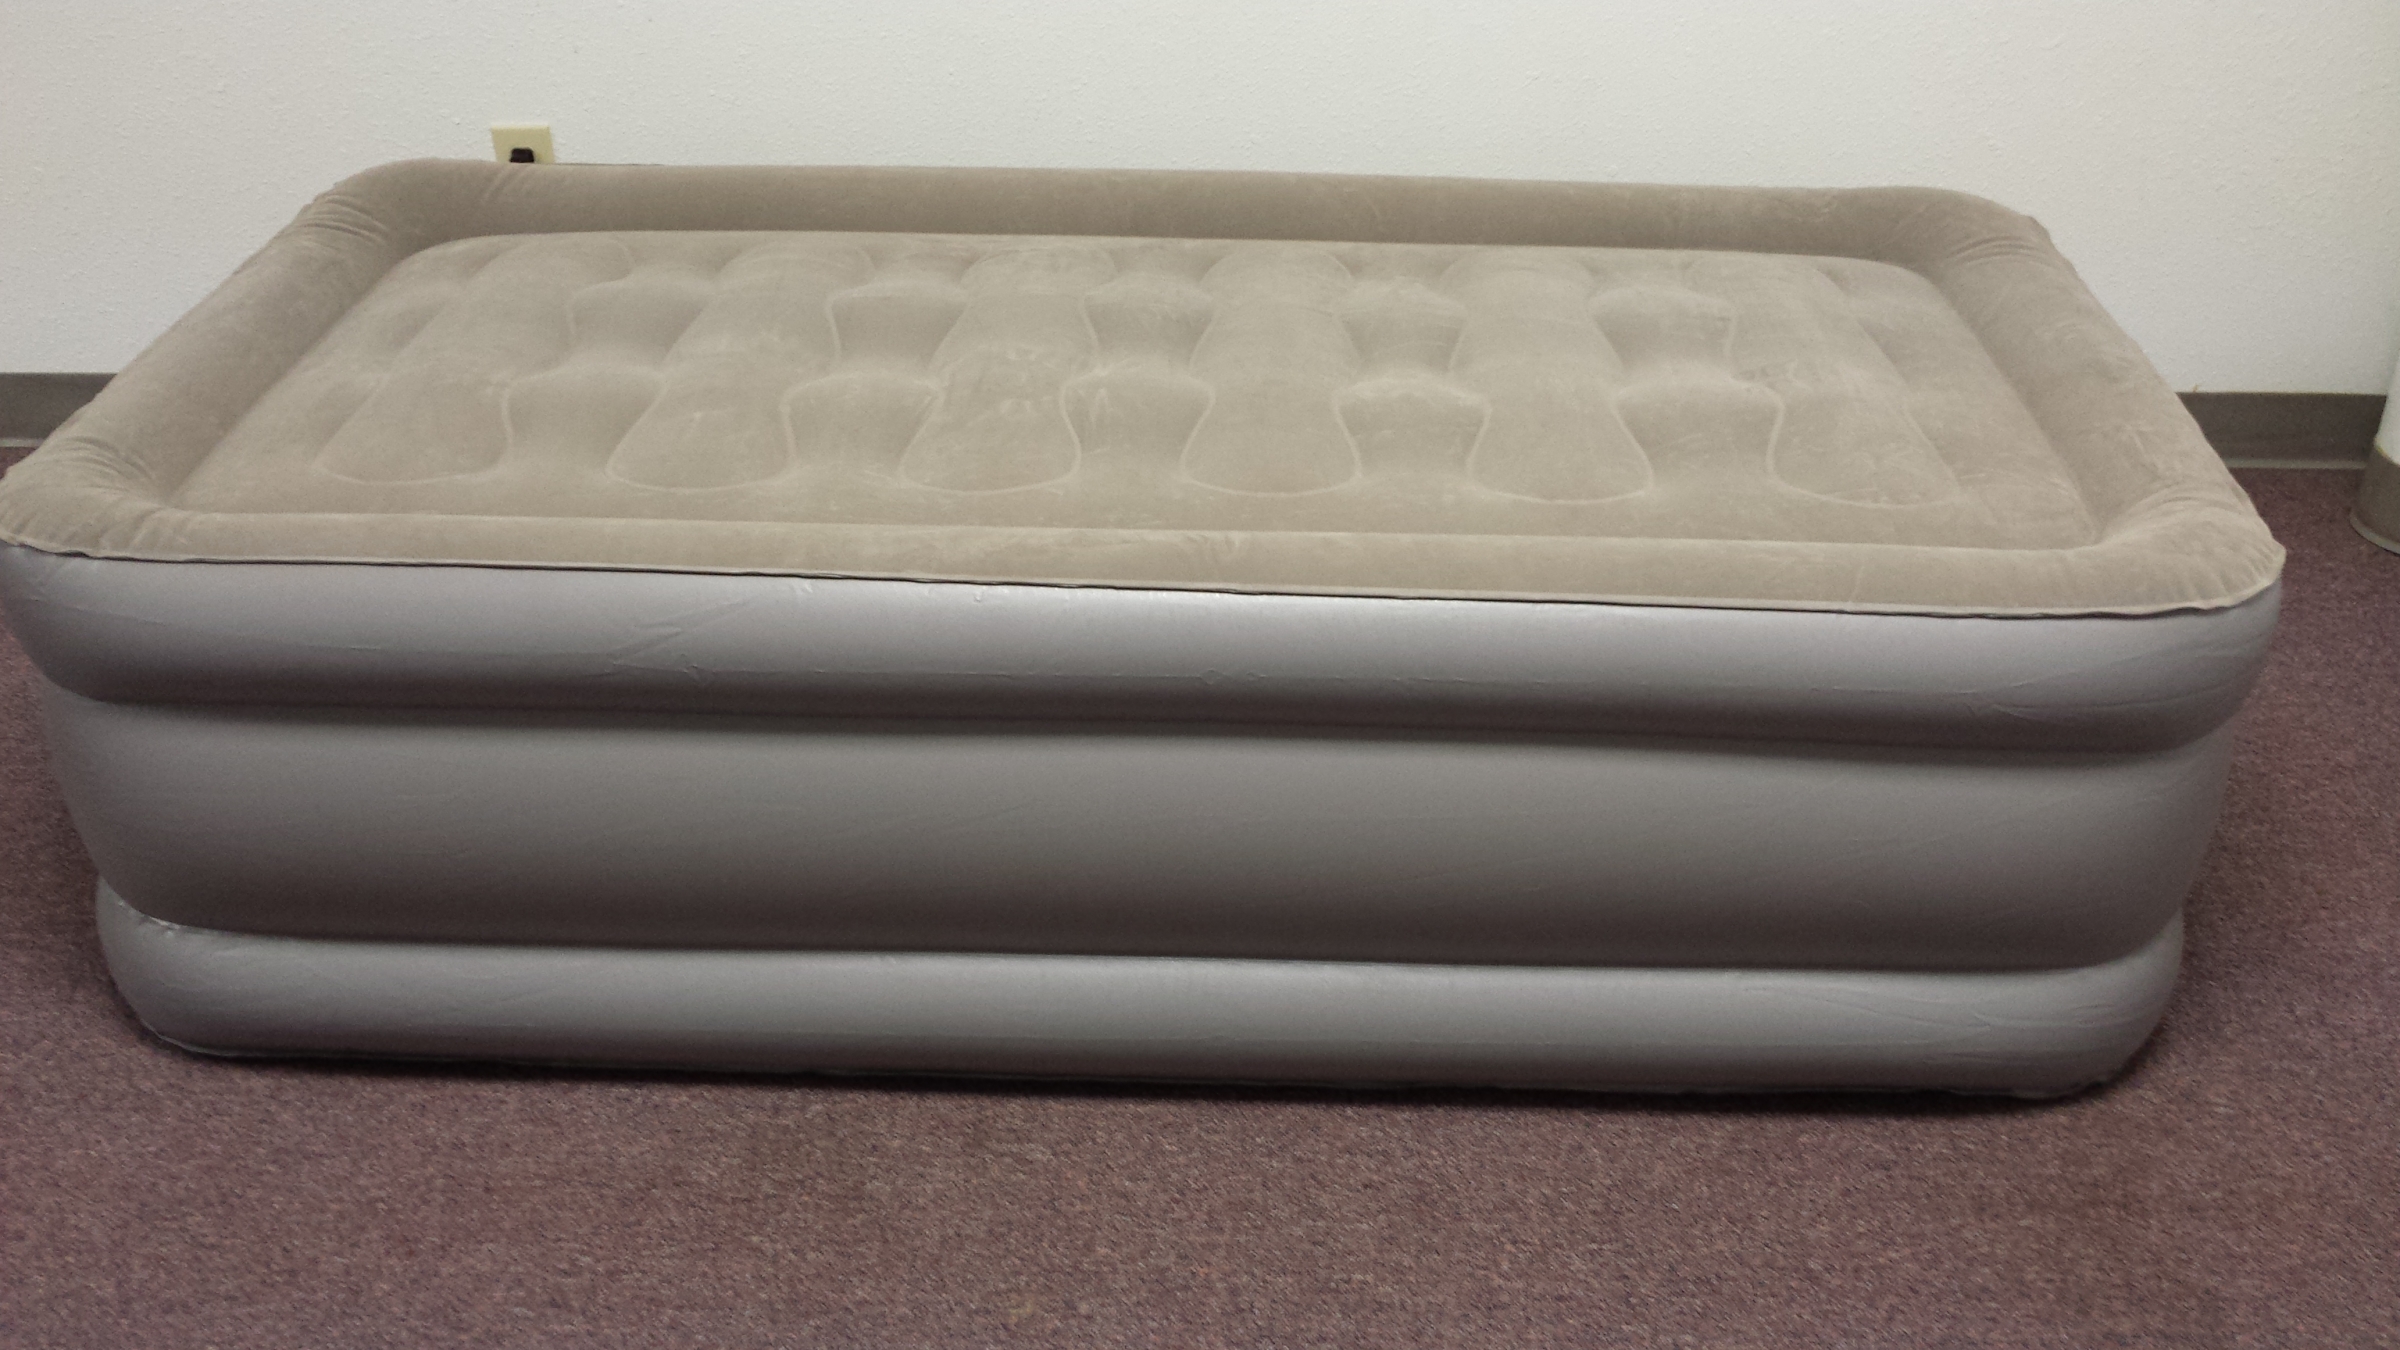 Tall firm air mattress, perfect for sleepovers!